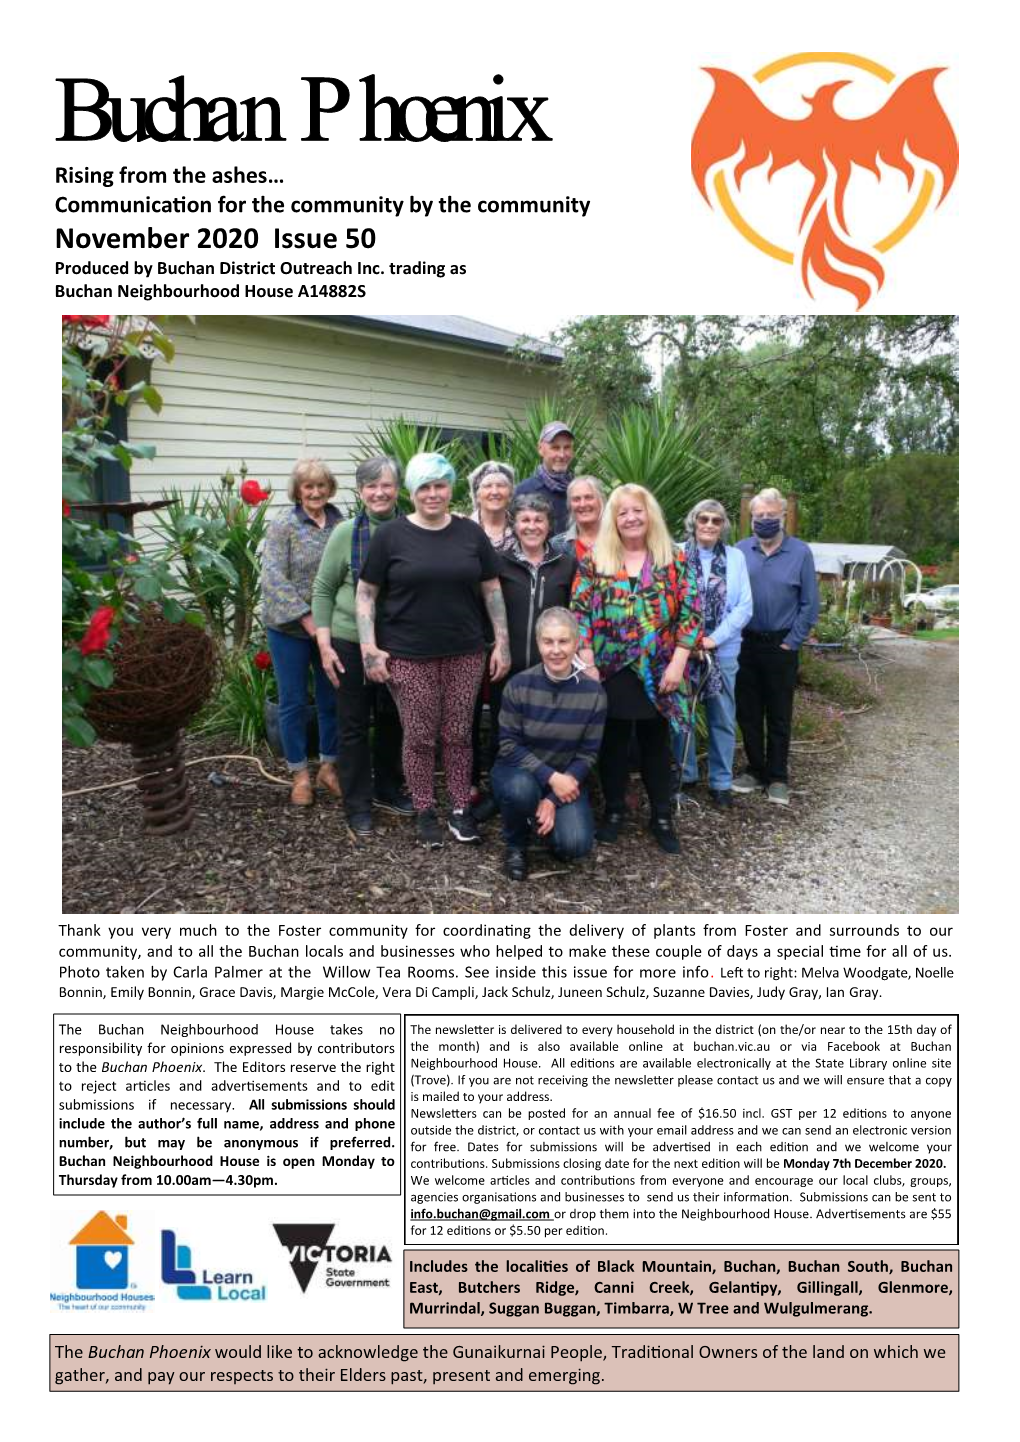 Buchan Phoenix Rising from the Ashes… Communication for the Community by the Community November 2020 Issue 50 Produced by Buchan District Outreach Inc